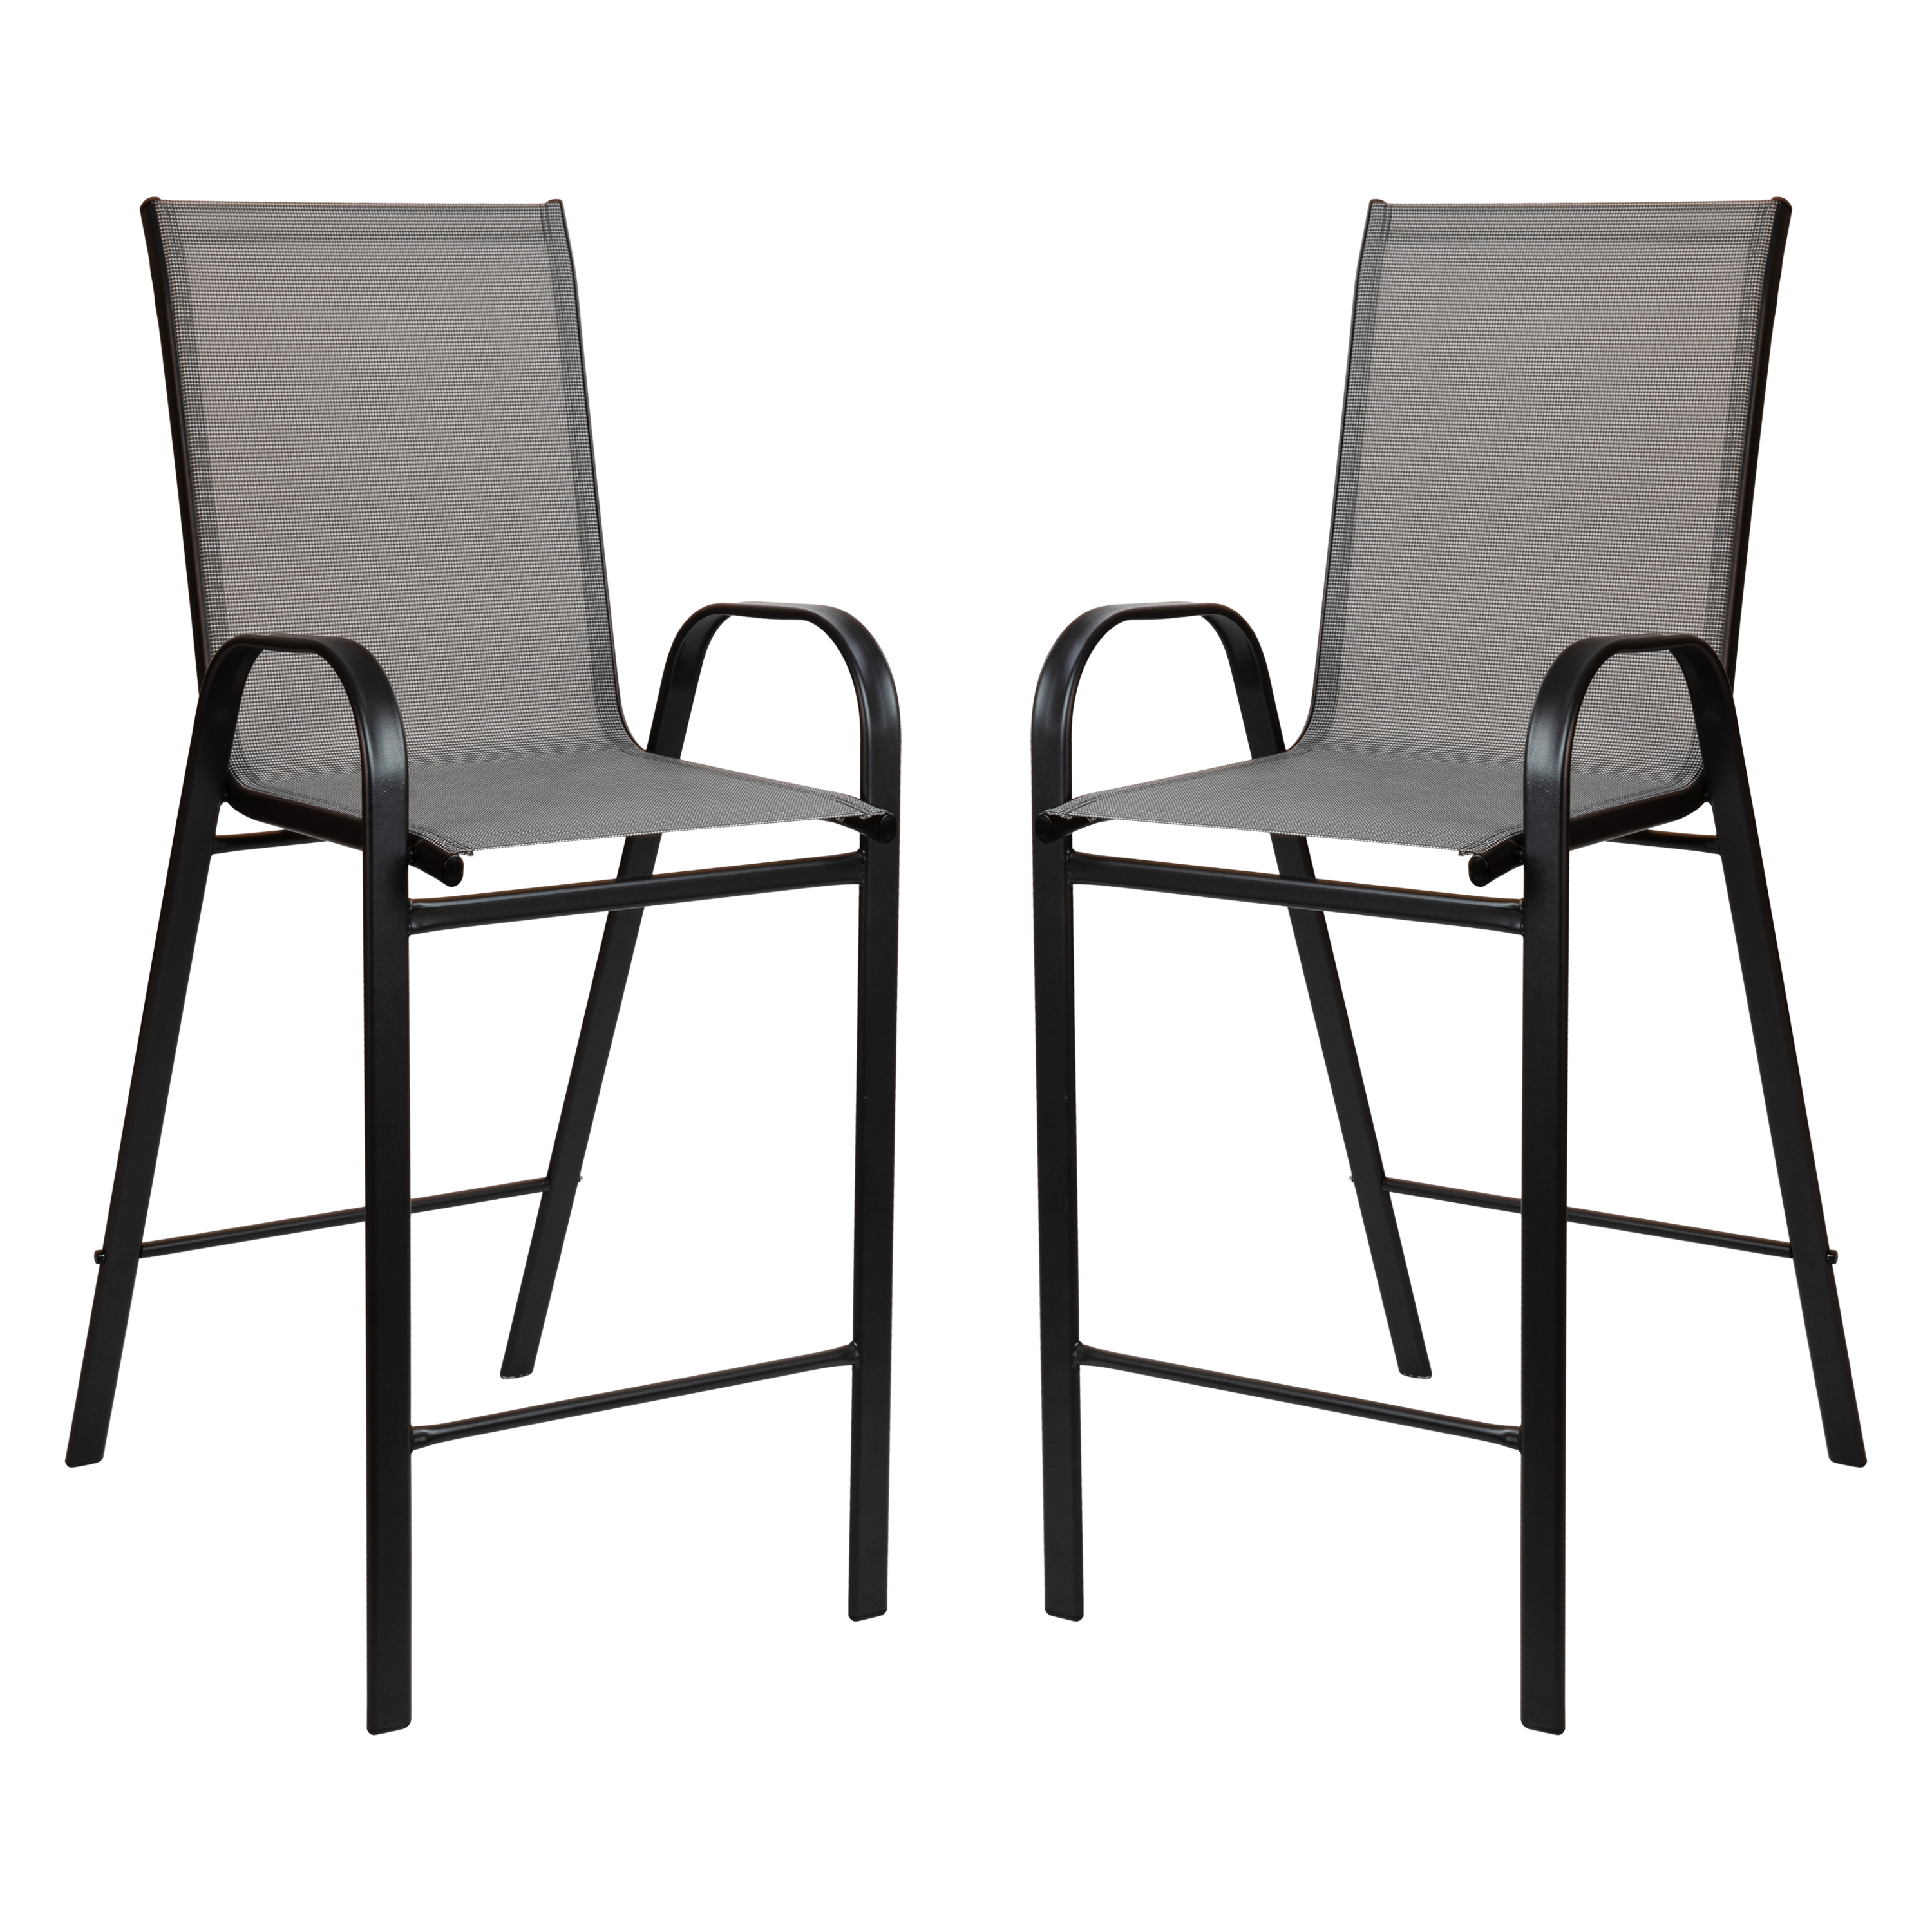 Flash Furniture 2-JJ-092H-GR-GG Series Gray Outdoor Bar Stool with Flex Comfort Material and Metal Frame, 2 Pack